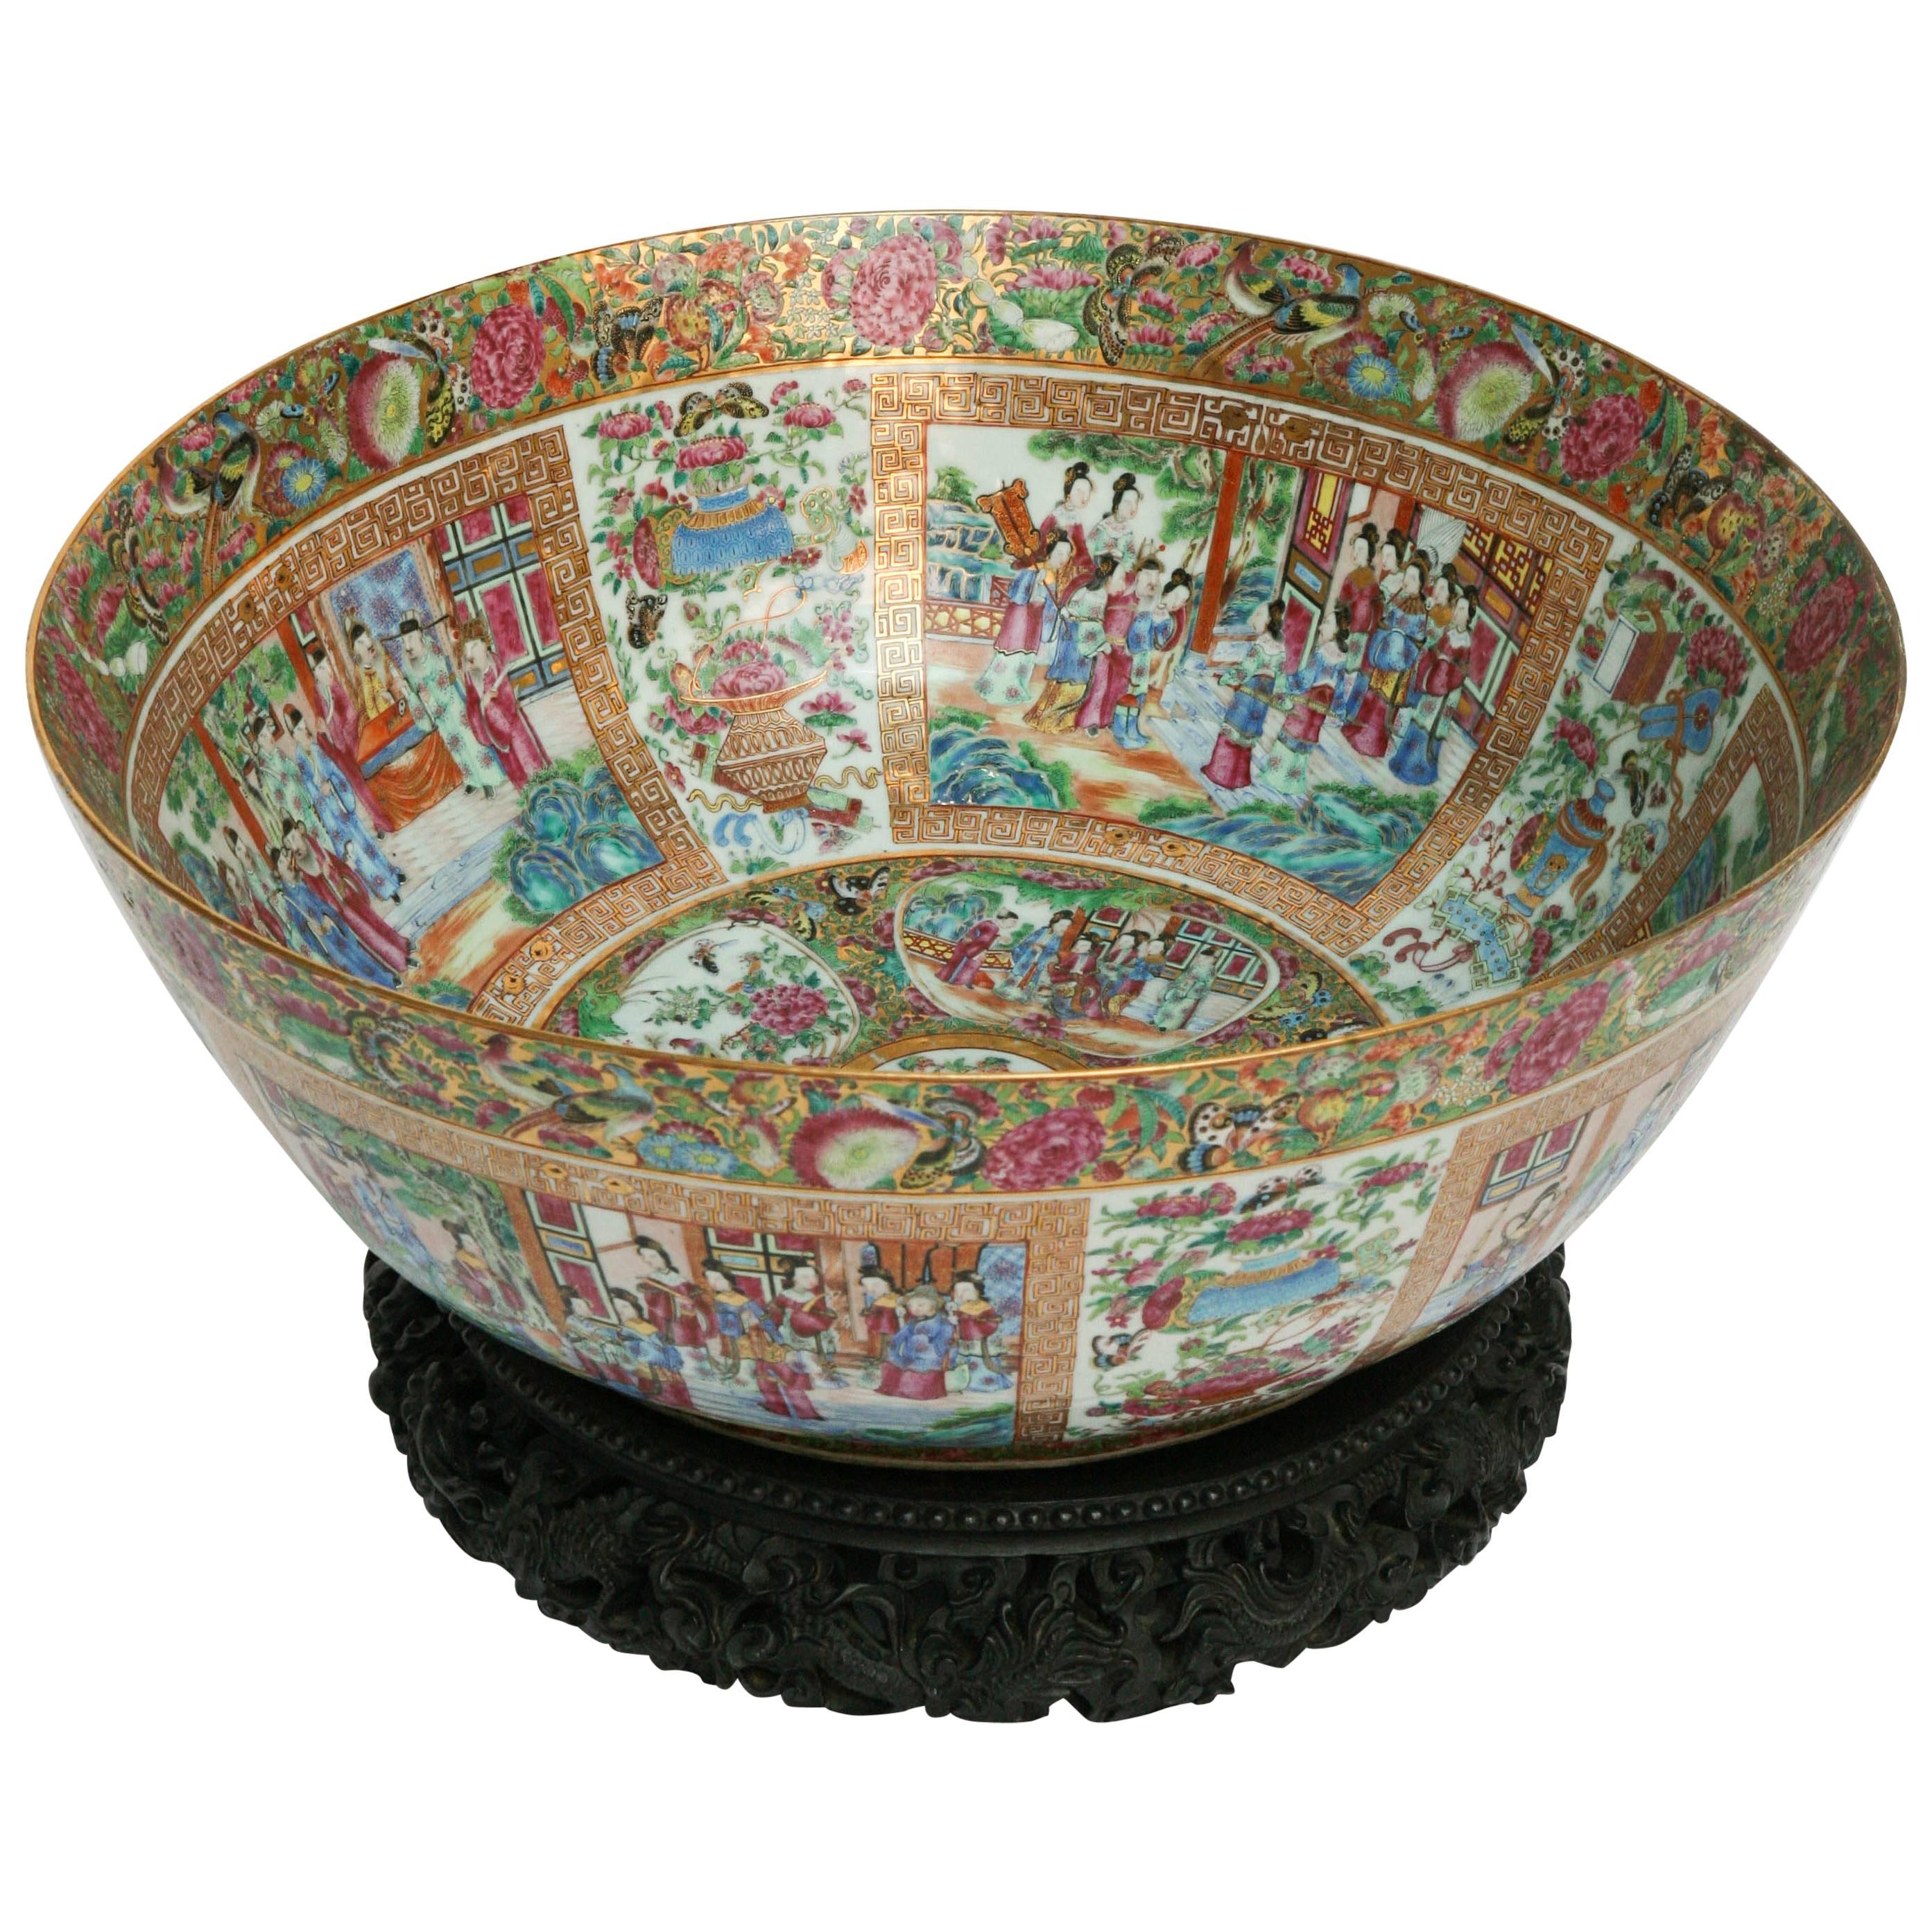 Important, Enormous, and Elaborate 19th Century Rose Mandarin Punch Bowl